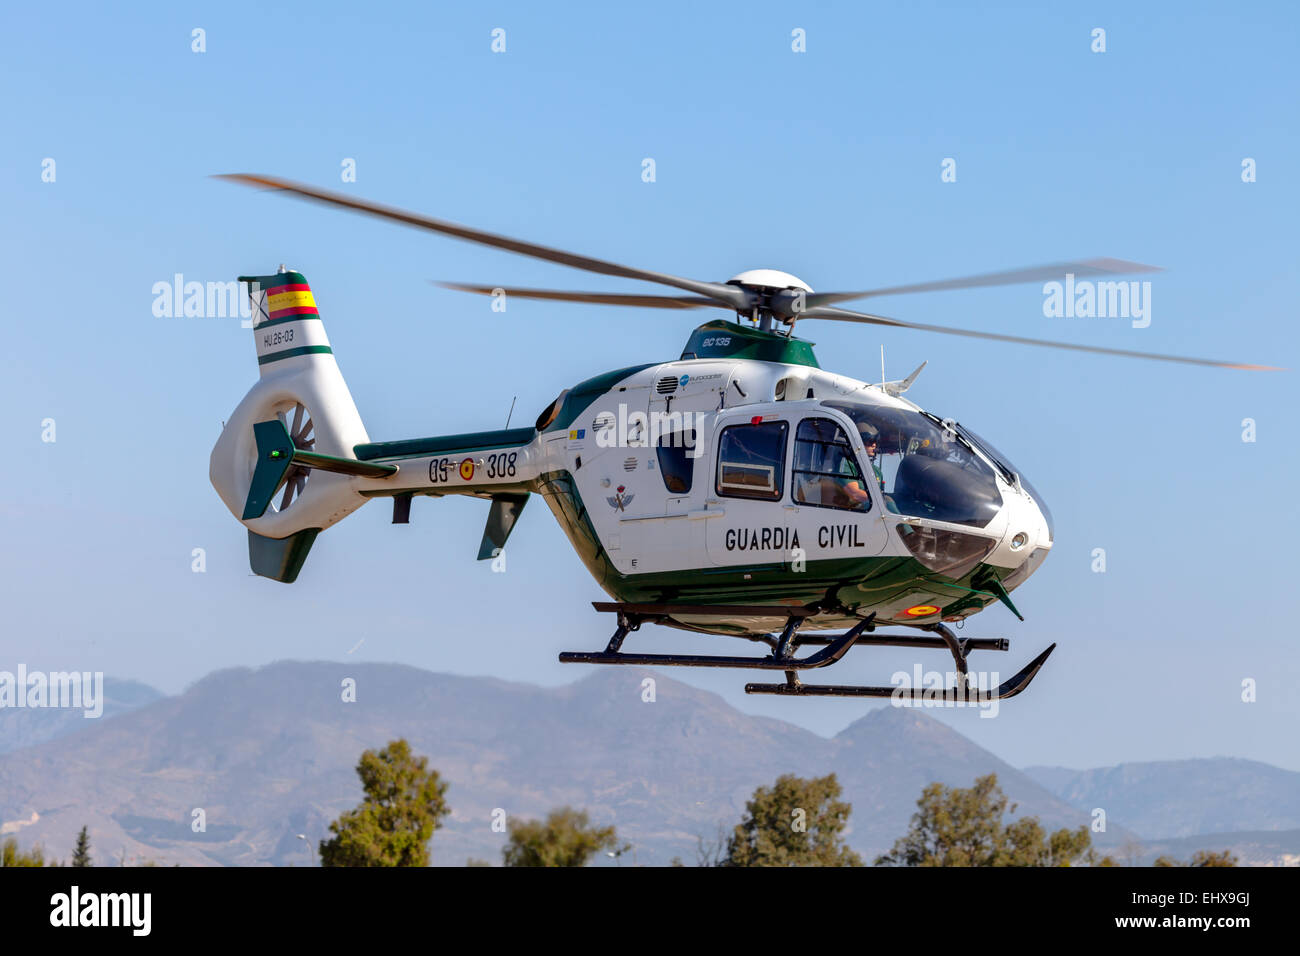 GRANADA, SPAIN-MAY 18:  Helicopter Eurocopter EC135 taking part in a  exhibition on the X aniversary of the Patrulla Aspa Stock Photo